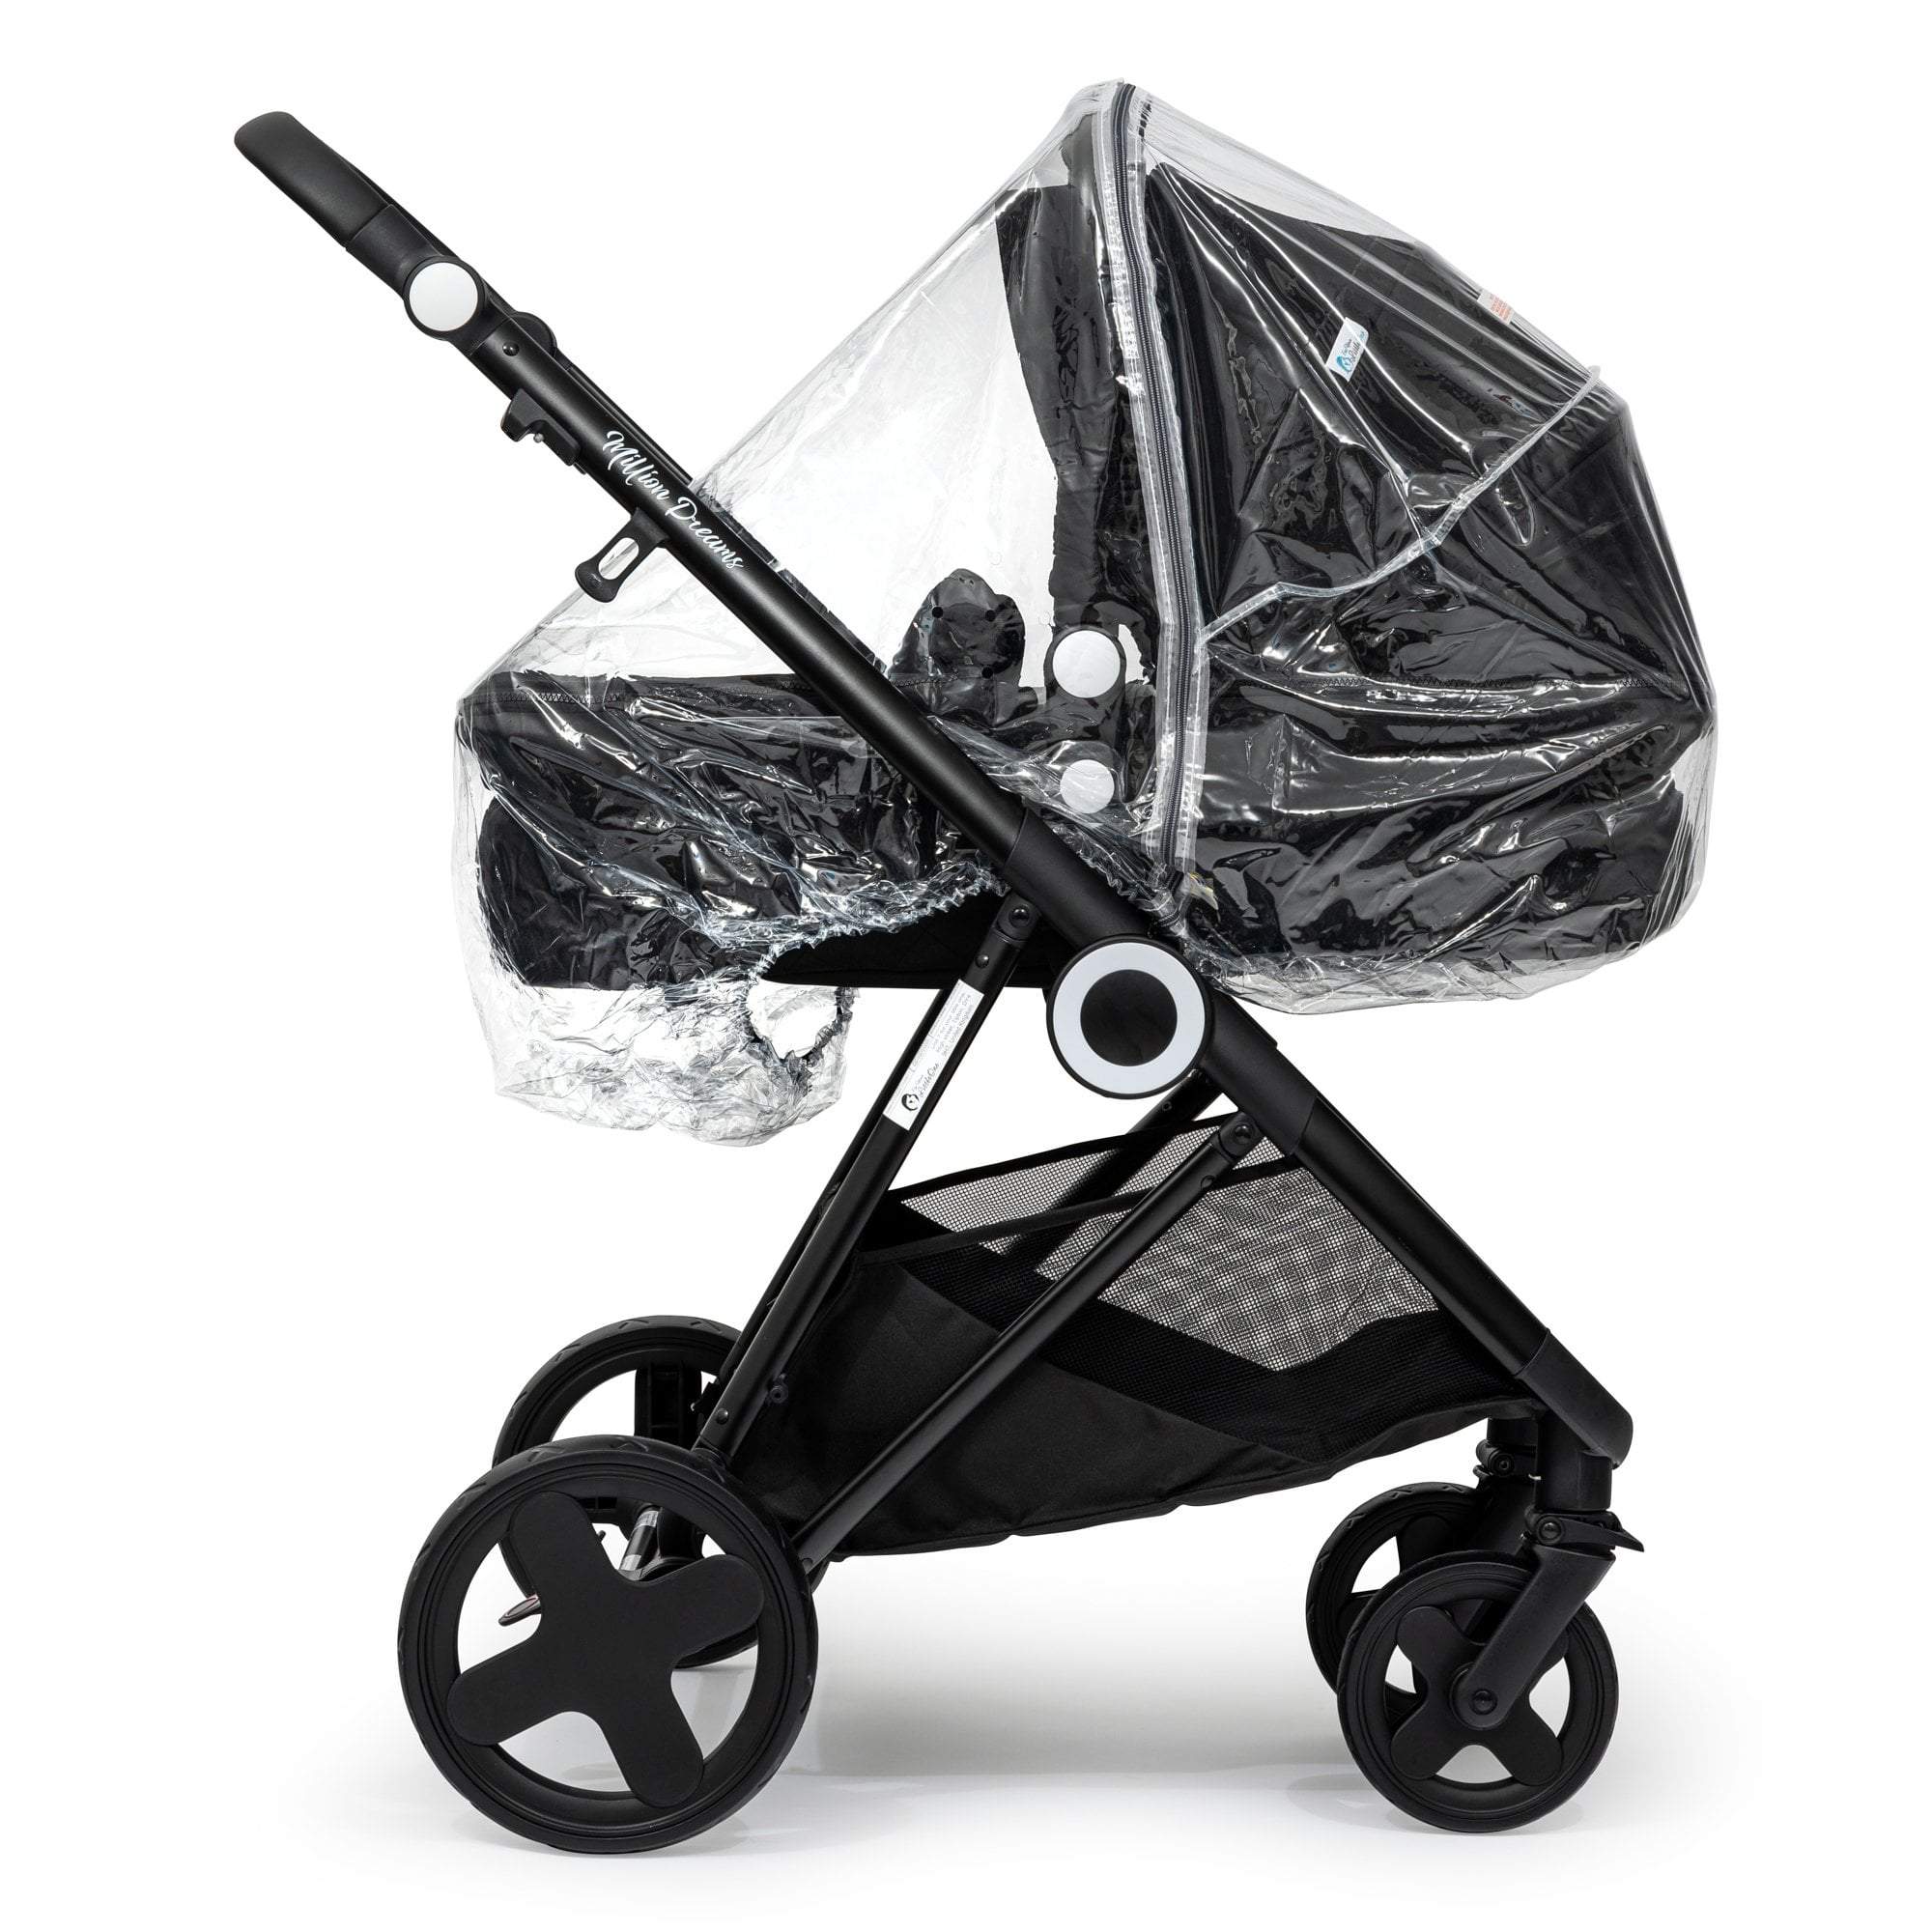 Carrycot Raincover Compatible With Jane - Fits All Models - For Your Little One